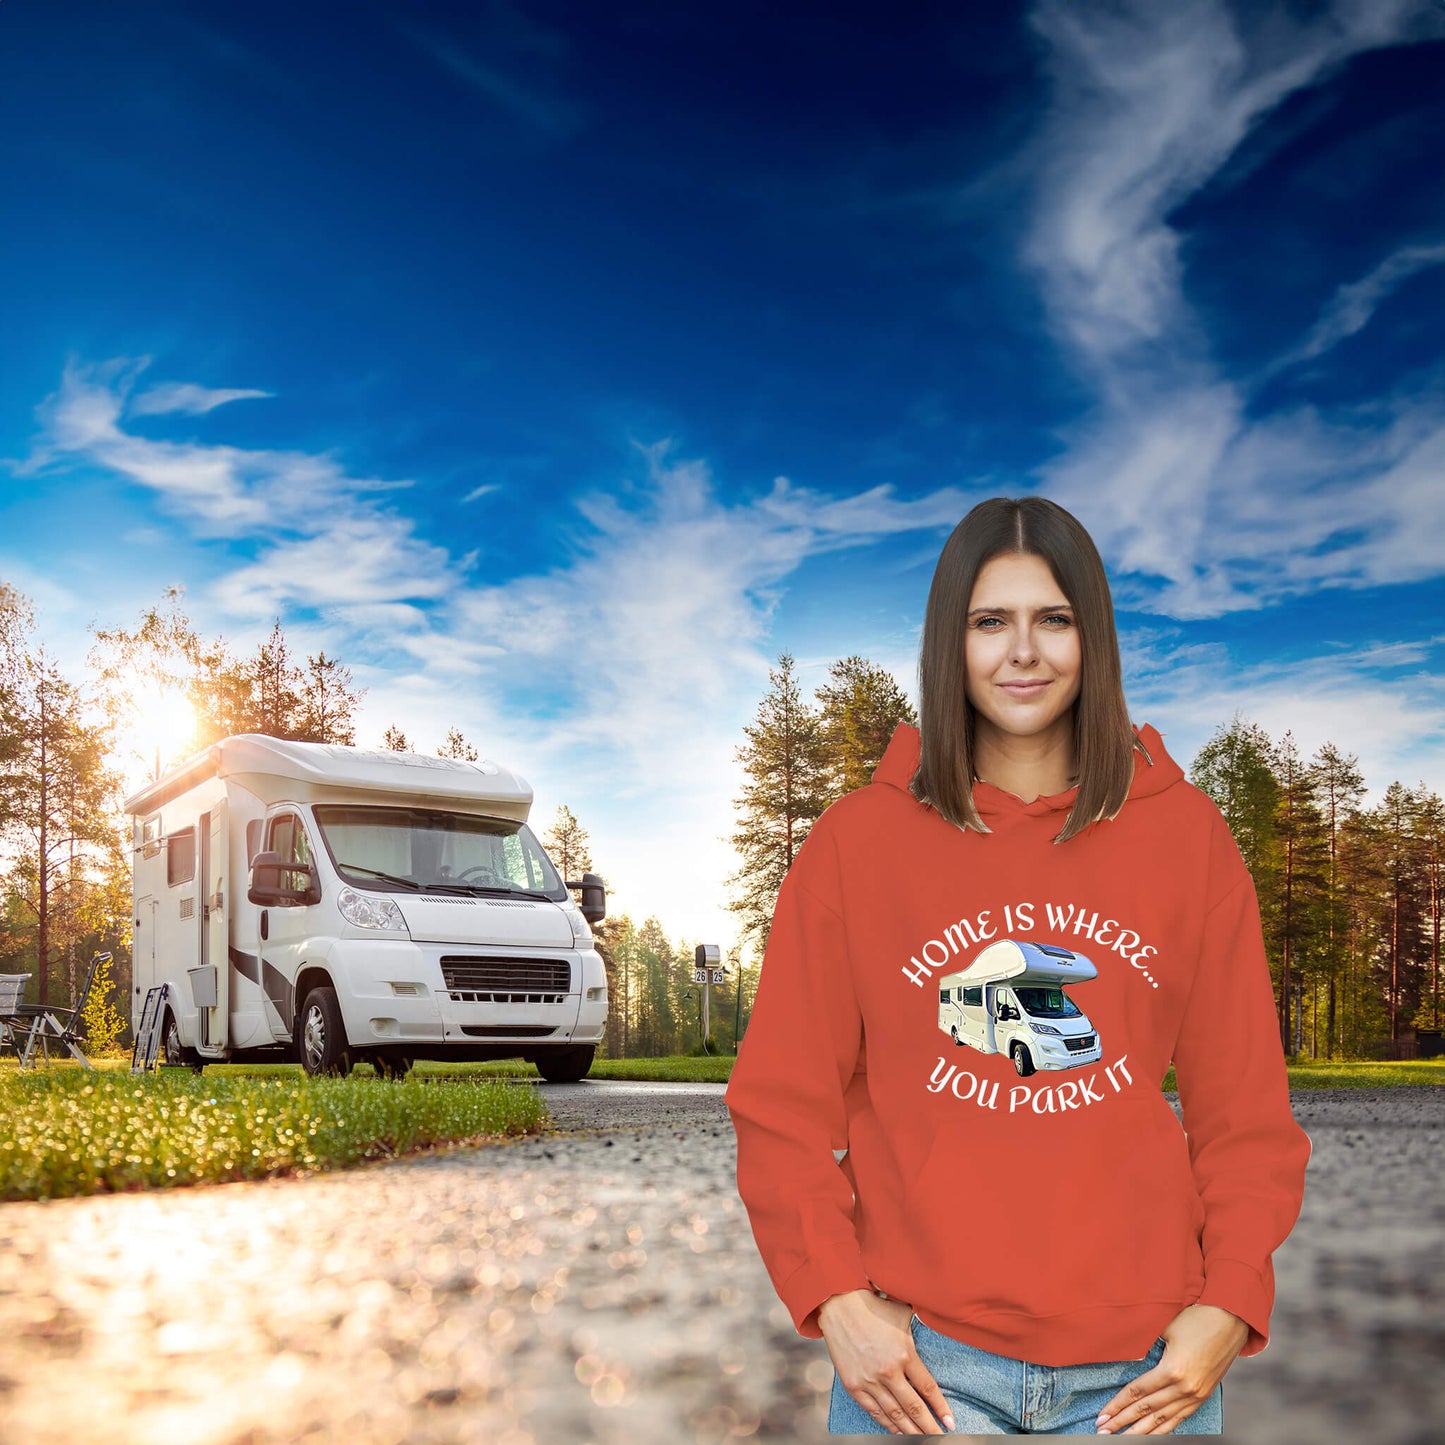 HOME IS WHERE YOU PARK IT MOTORHOME HOODIE